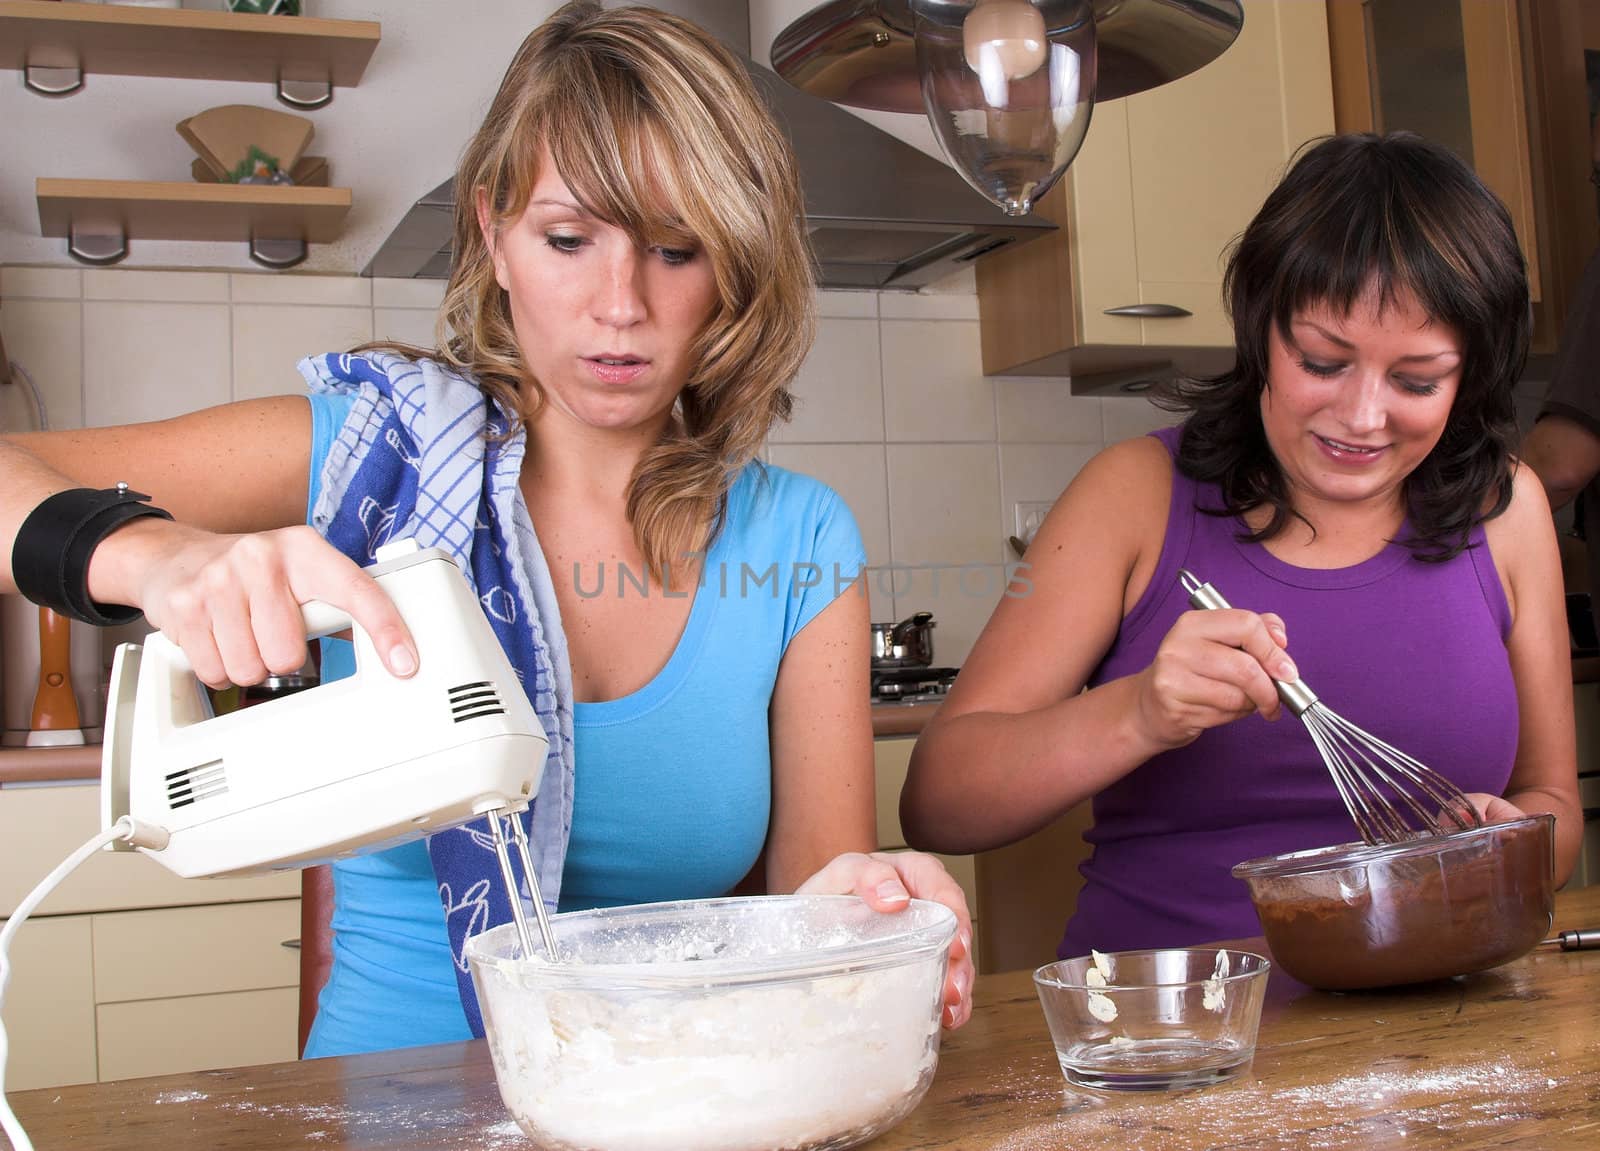 Two sisters busy in the kitchen making brownies and cake